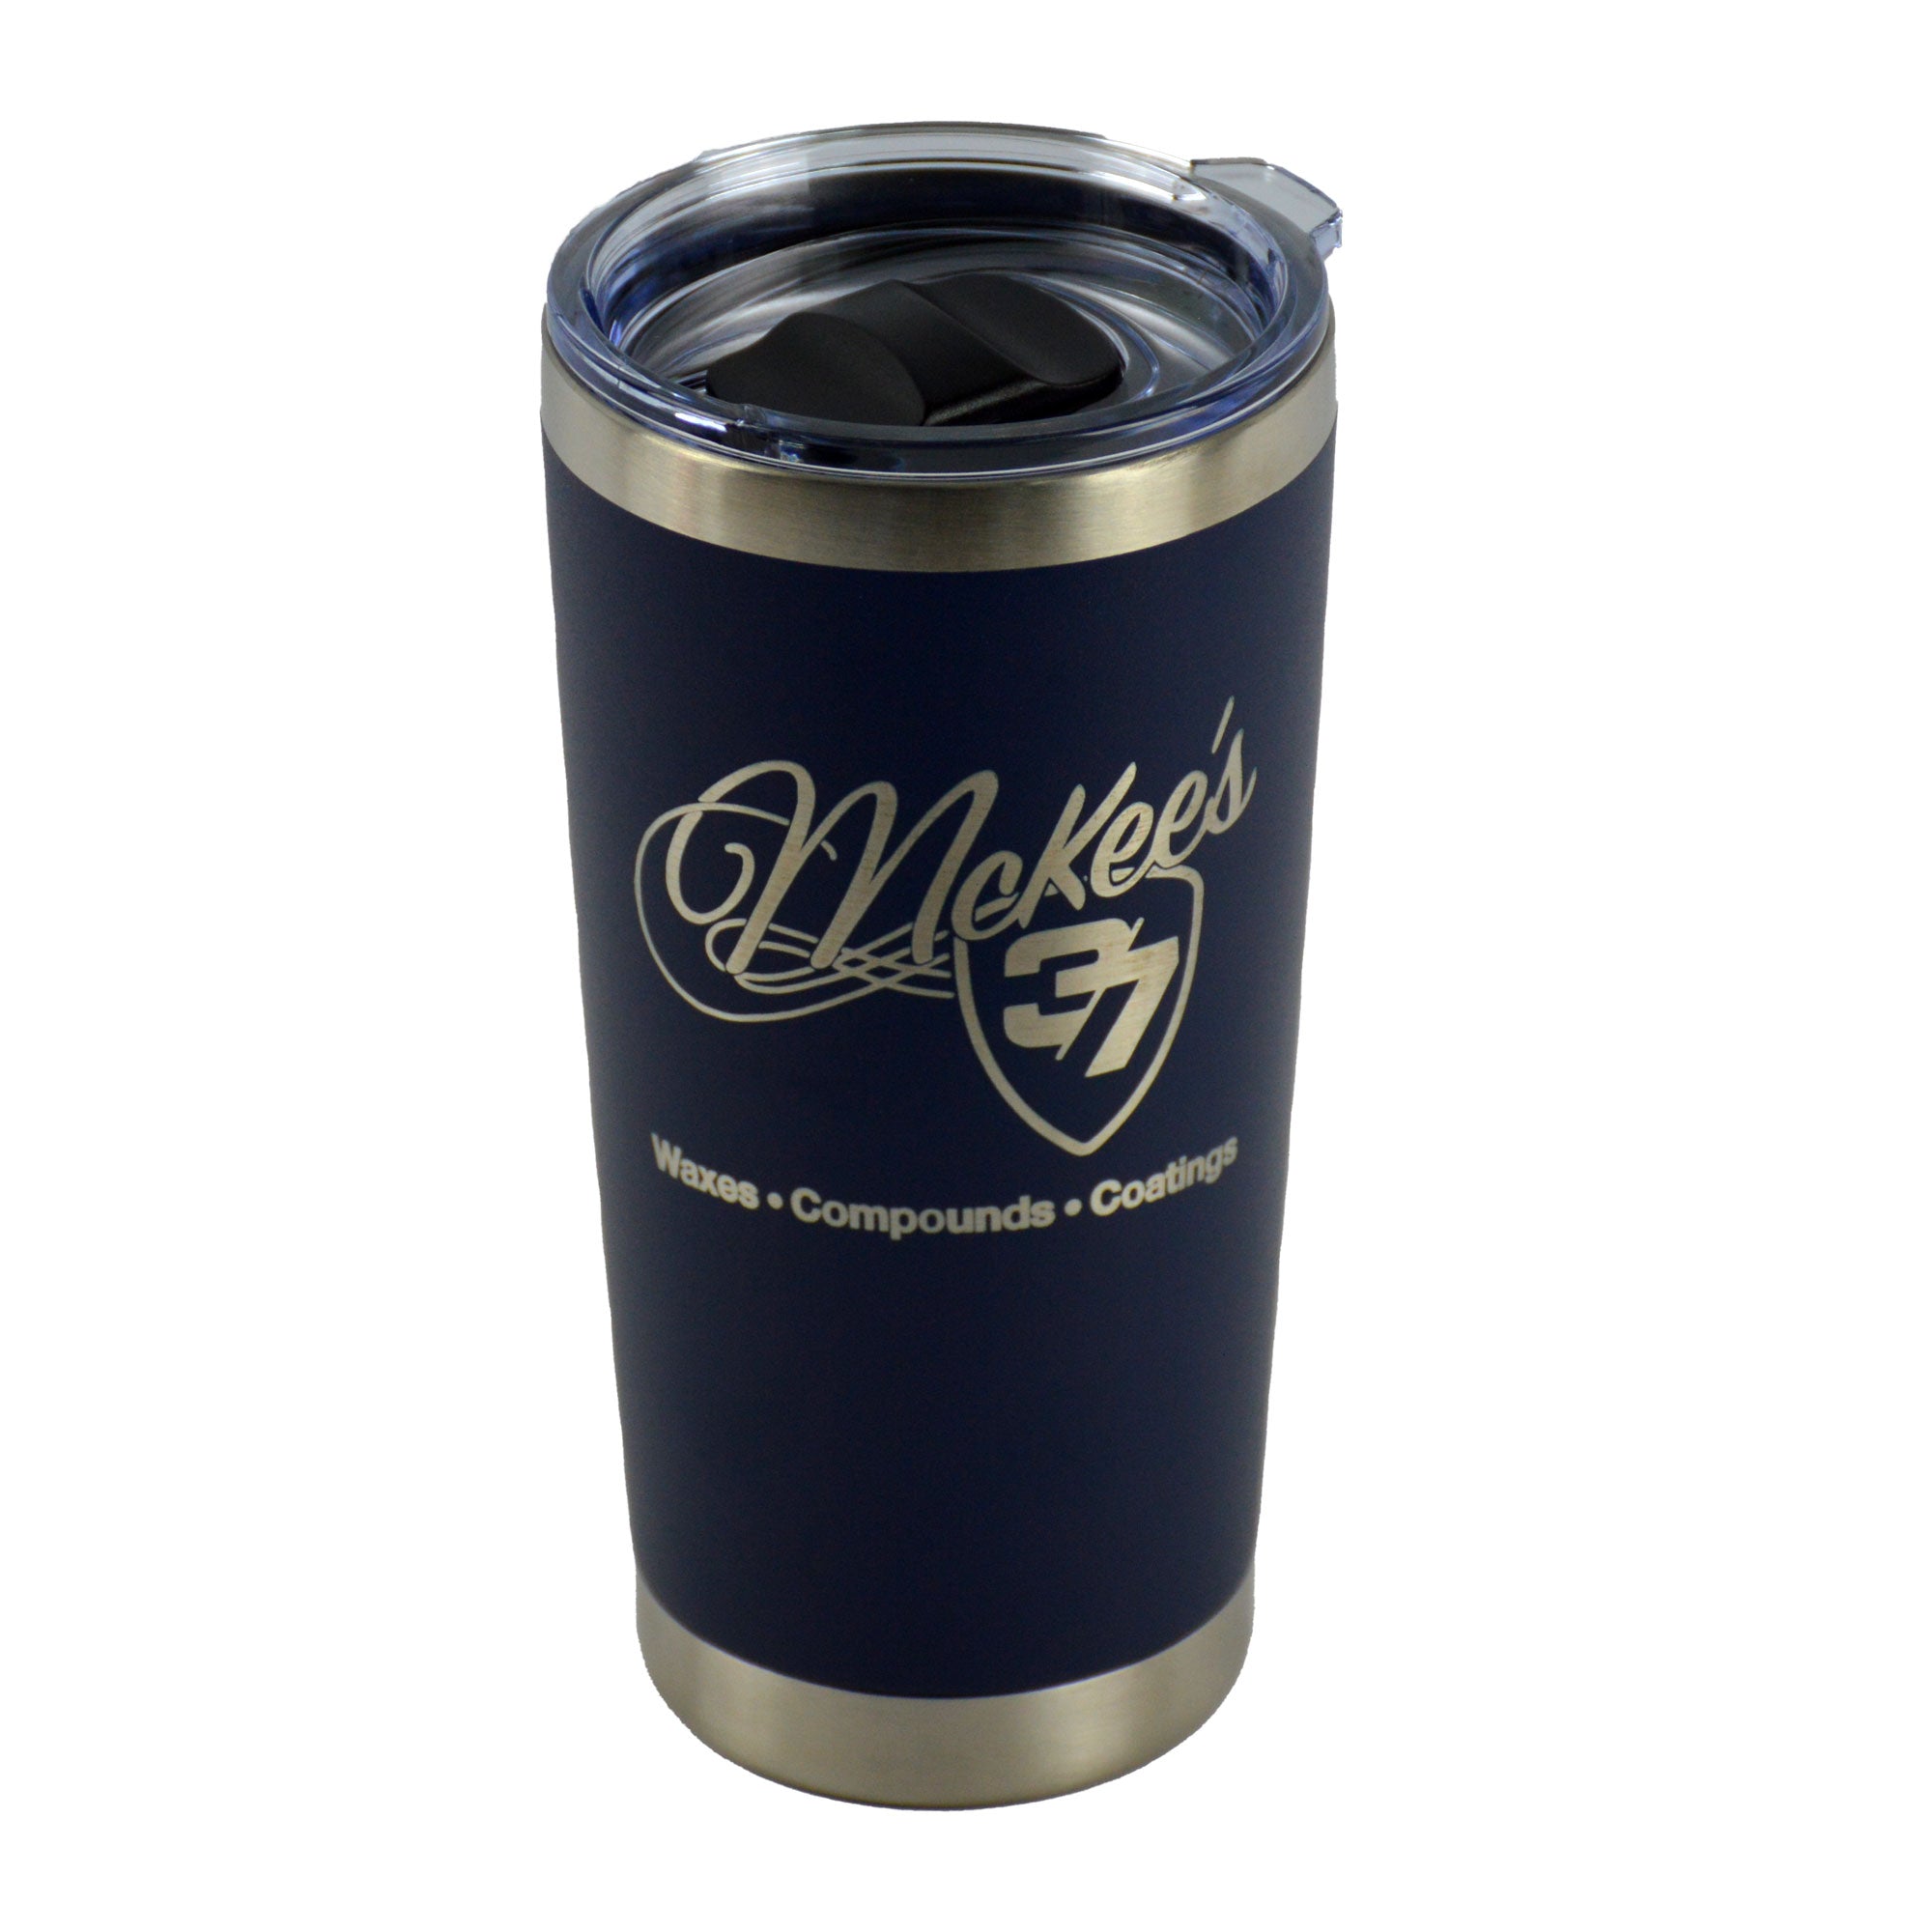 McKee's 37 Double-Wall Stainless Steel Tumbler